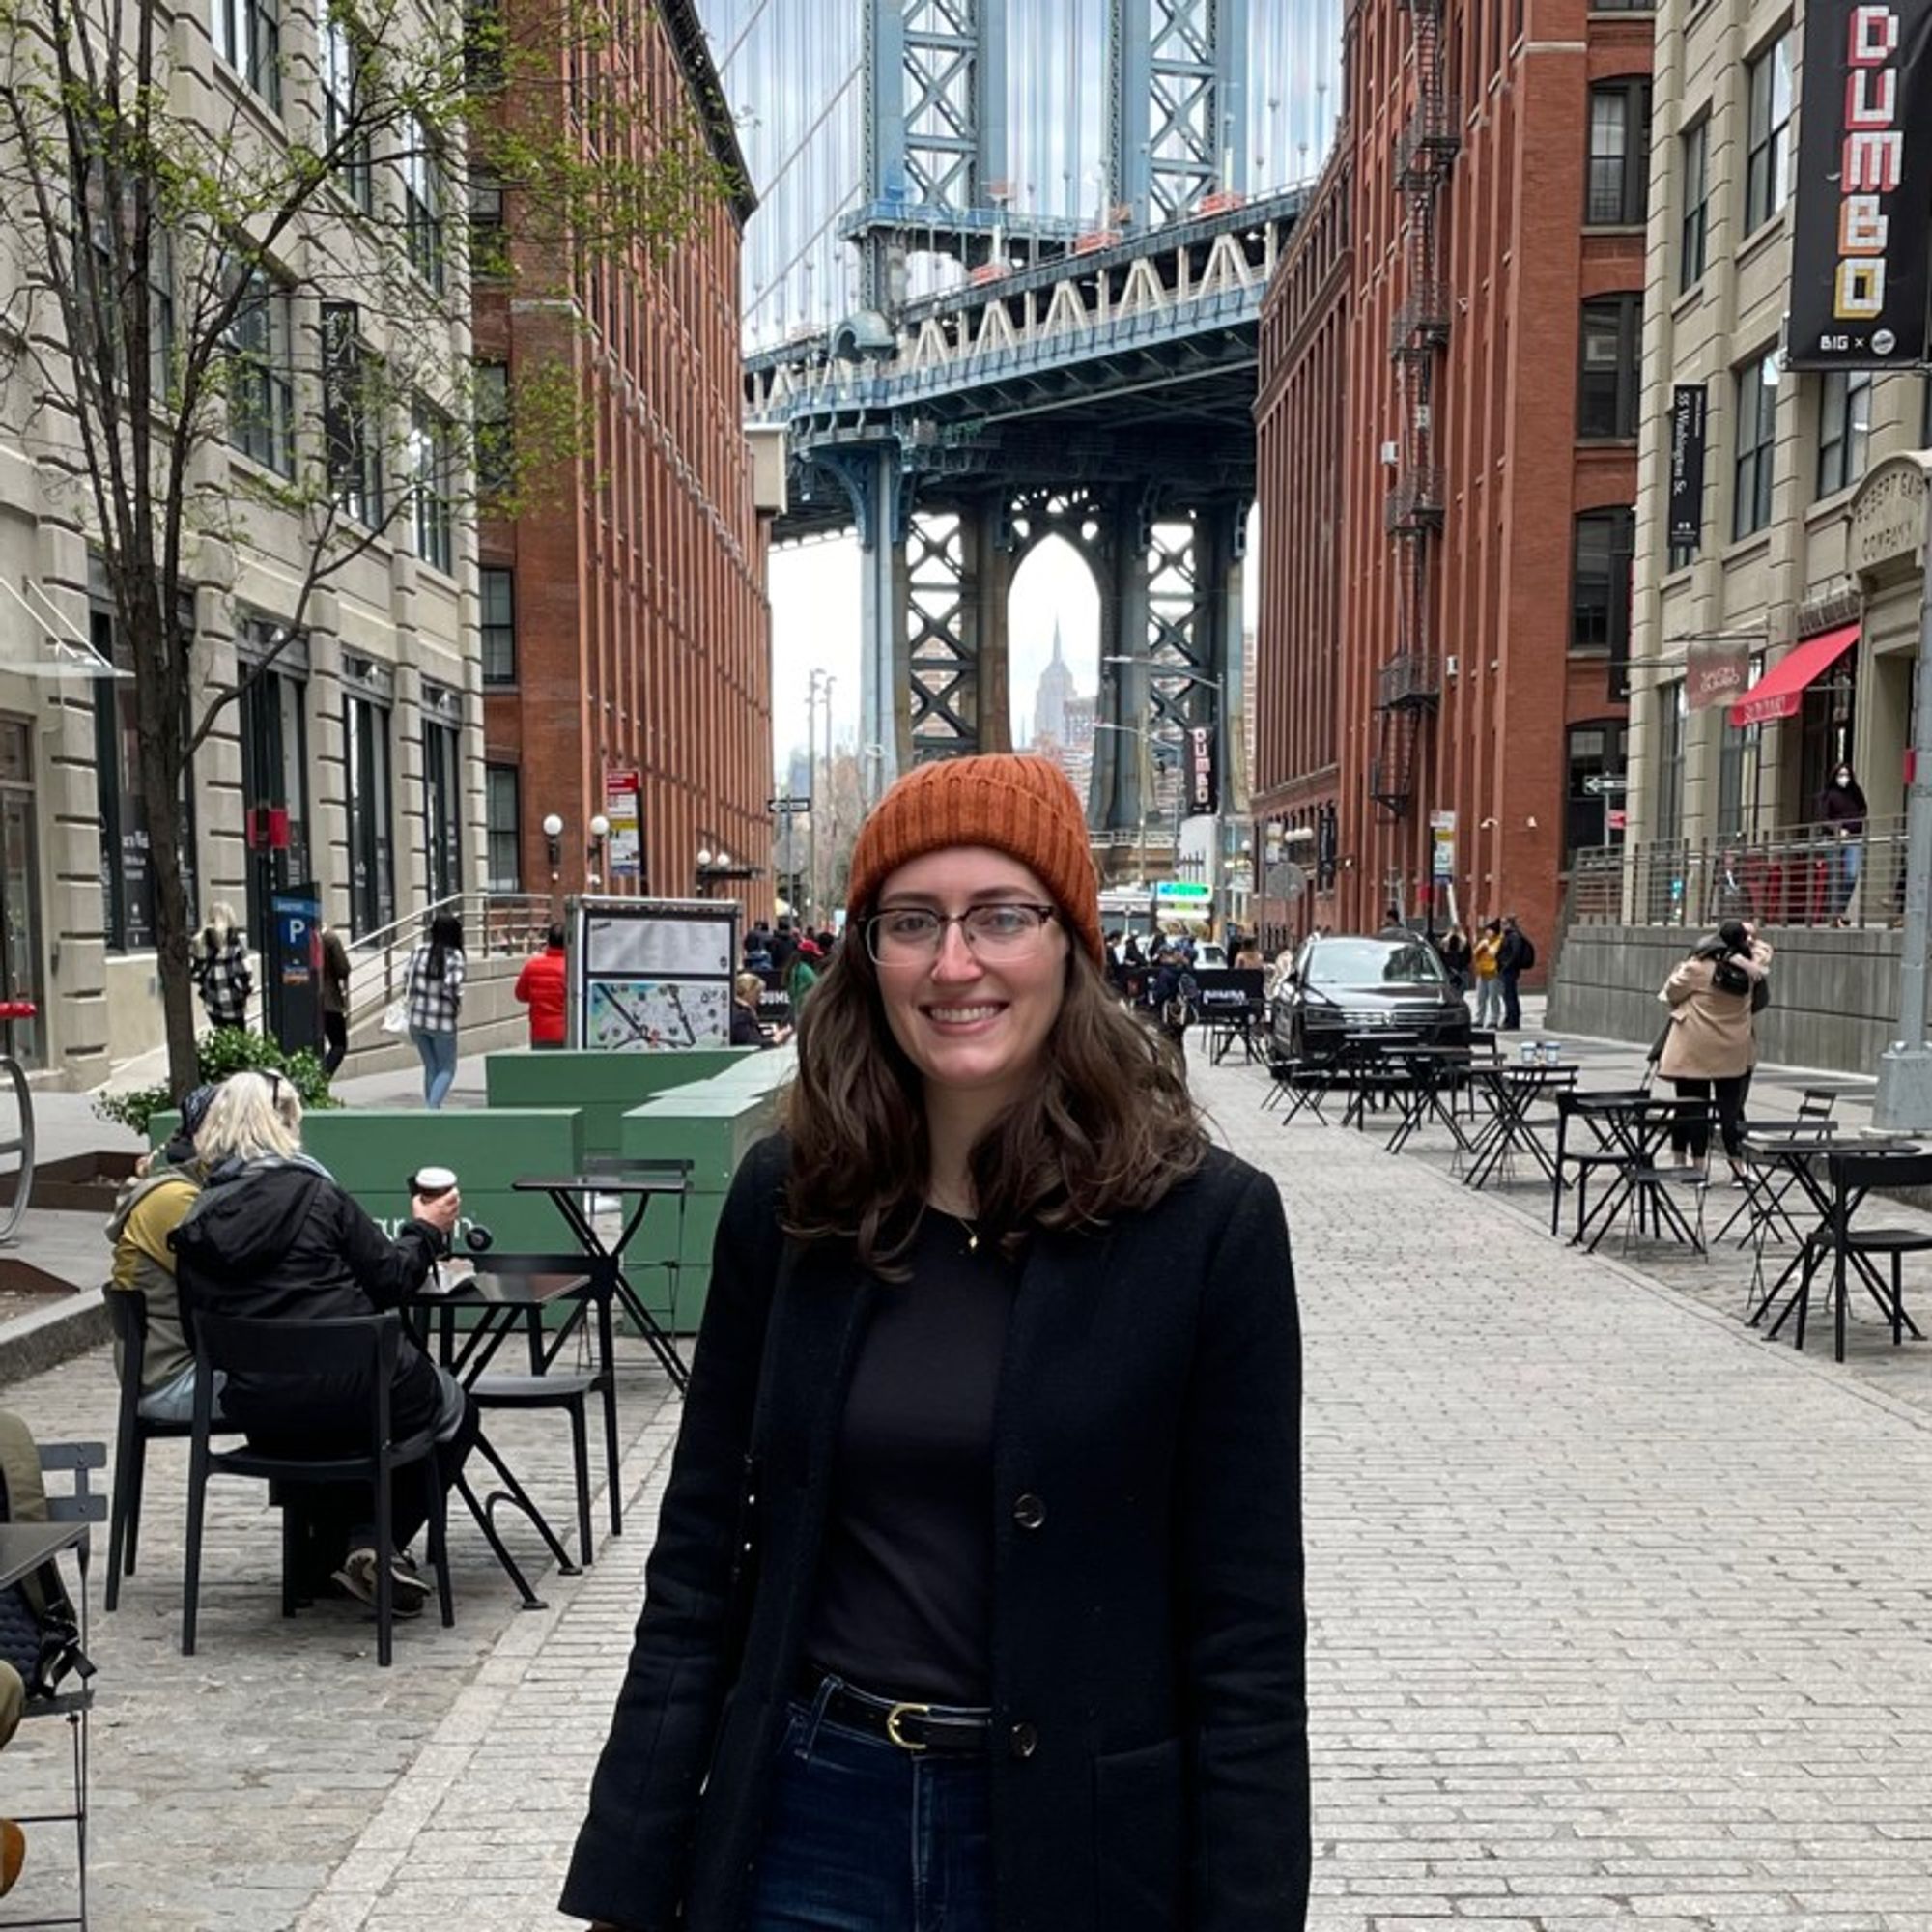 Nicole Kinser
Software Engineer
Former Senior Software Engineer @ Airbnb • Loves playing volleyball, hiking and camping, interior design and DIY home improvement